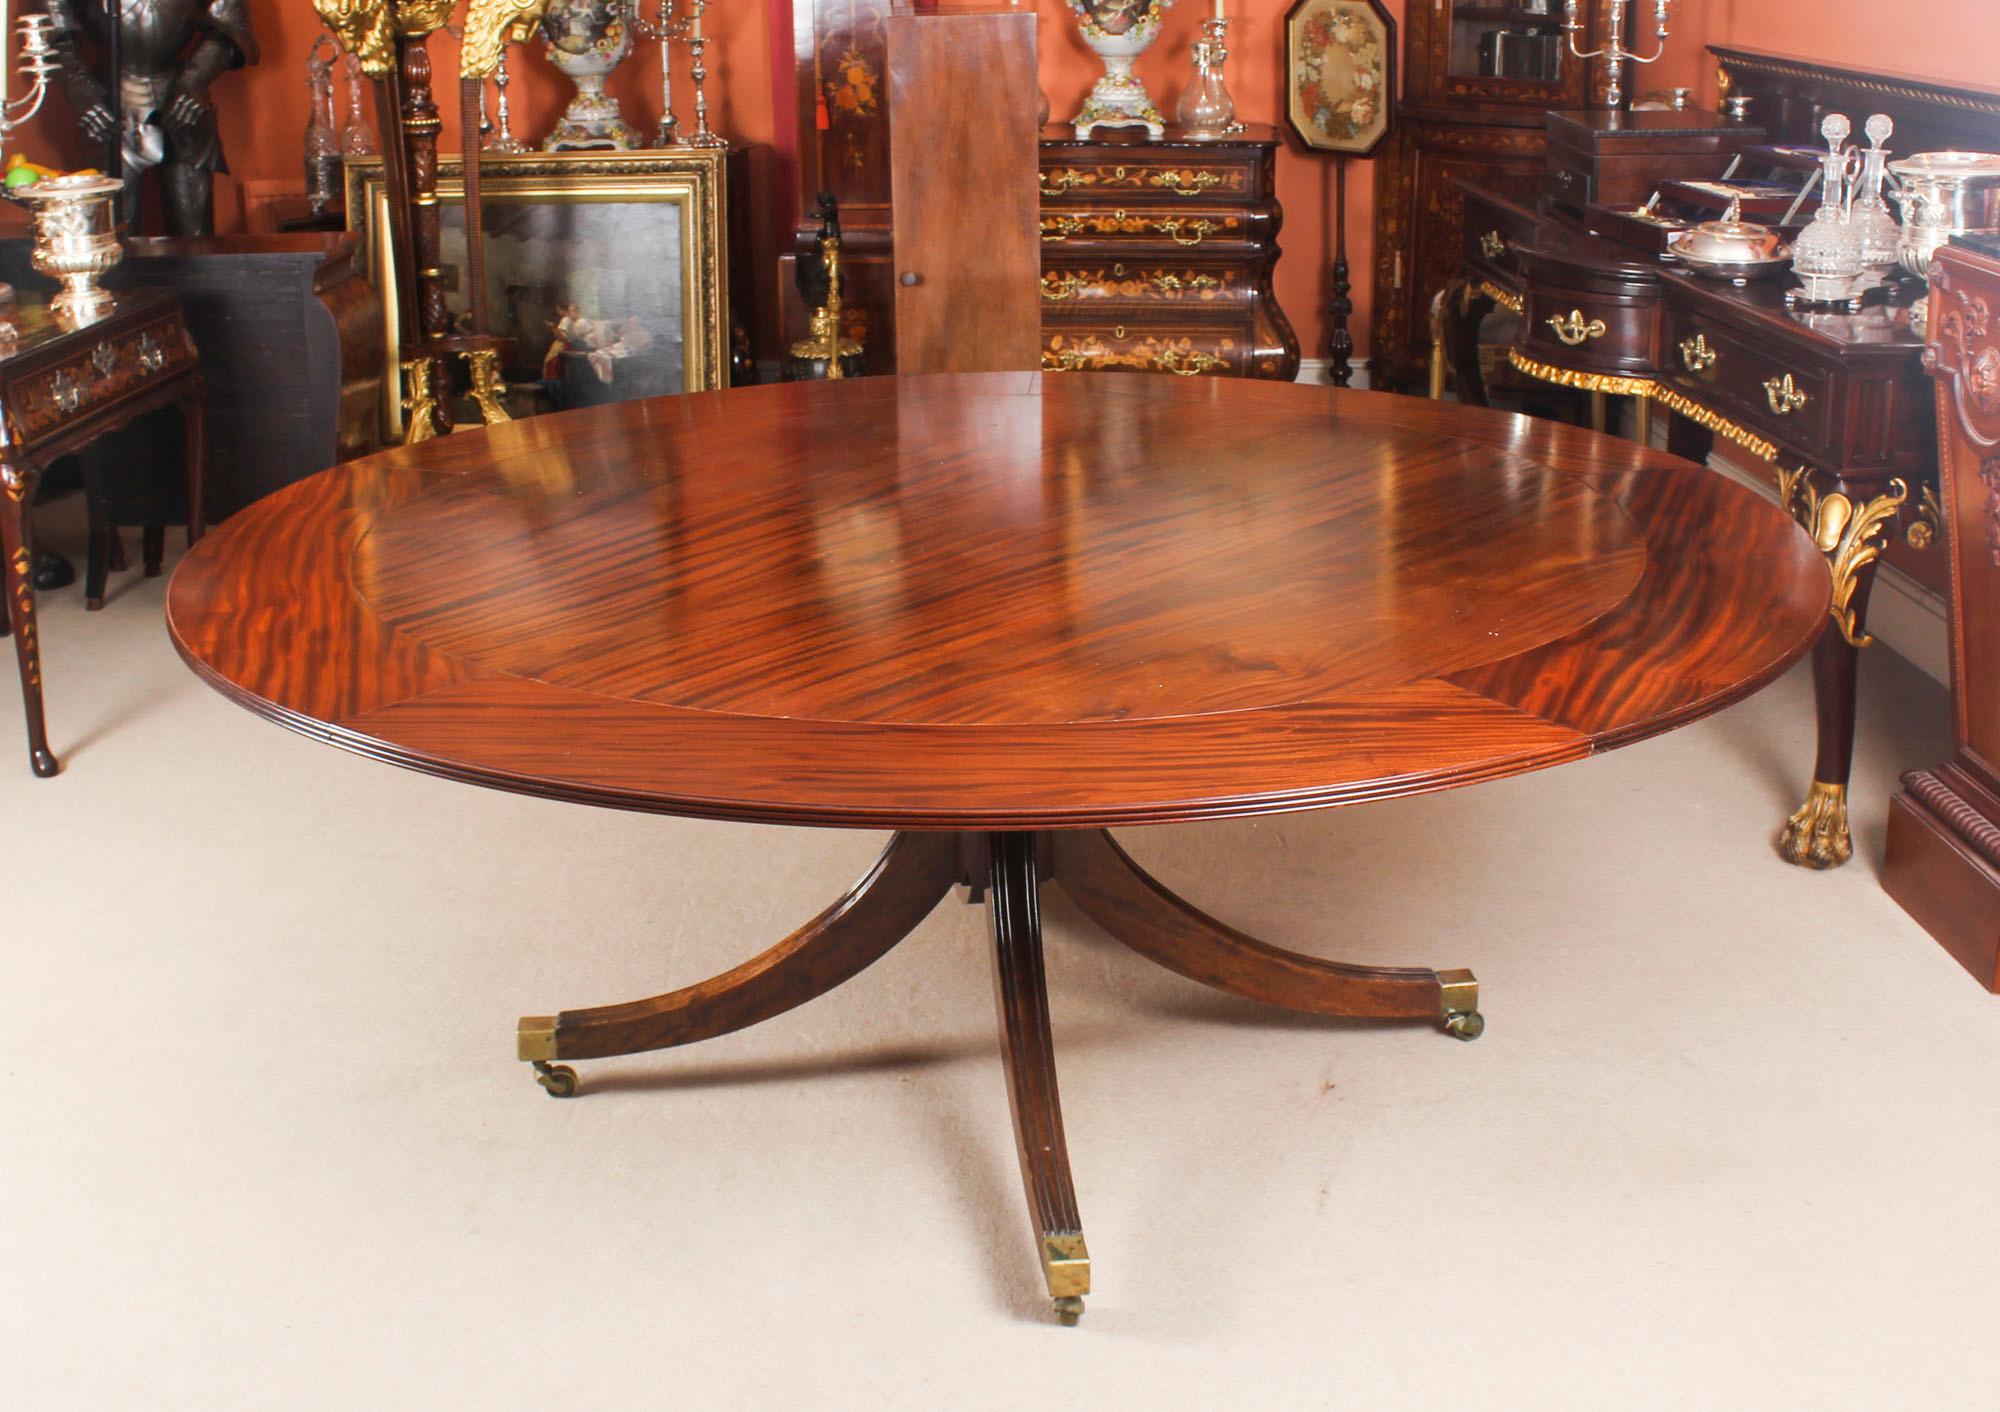 This beautiful dining set comprises a Regency Revival Jupe style dining table mid-20th century in date, with the matching set of eight bespoke Regency style dining chairs.

The table has a solid mahogany top with a reeded edgethat has five